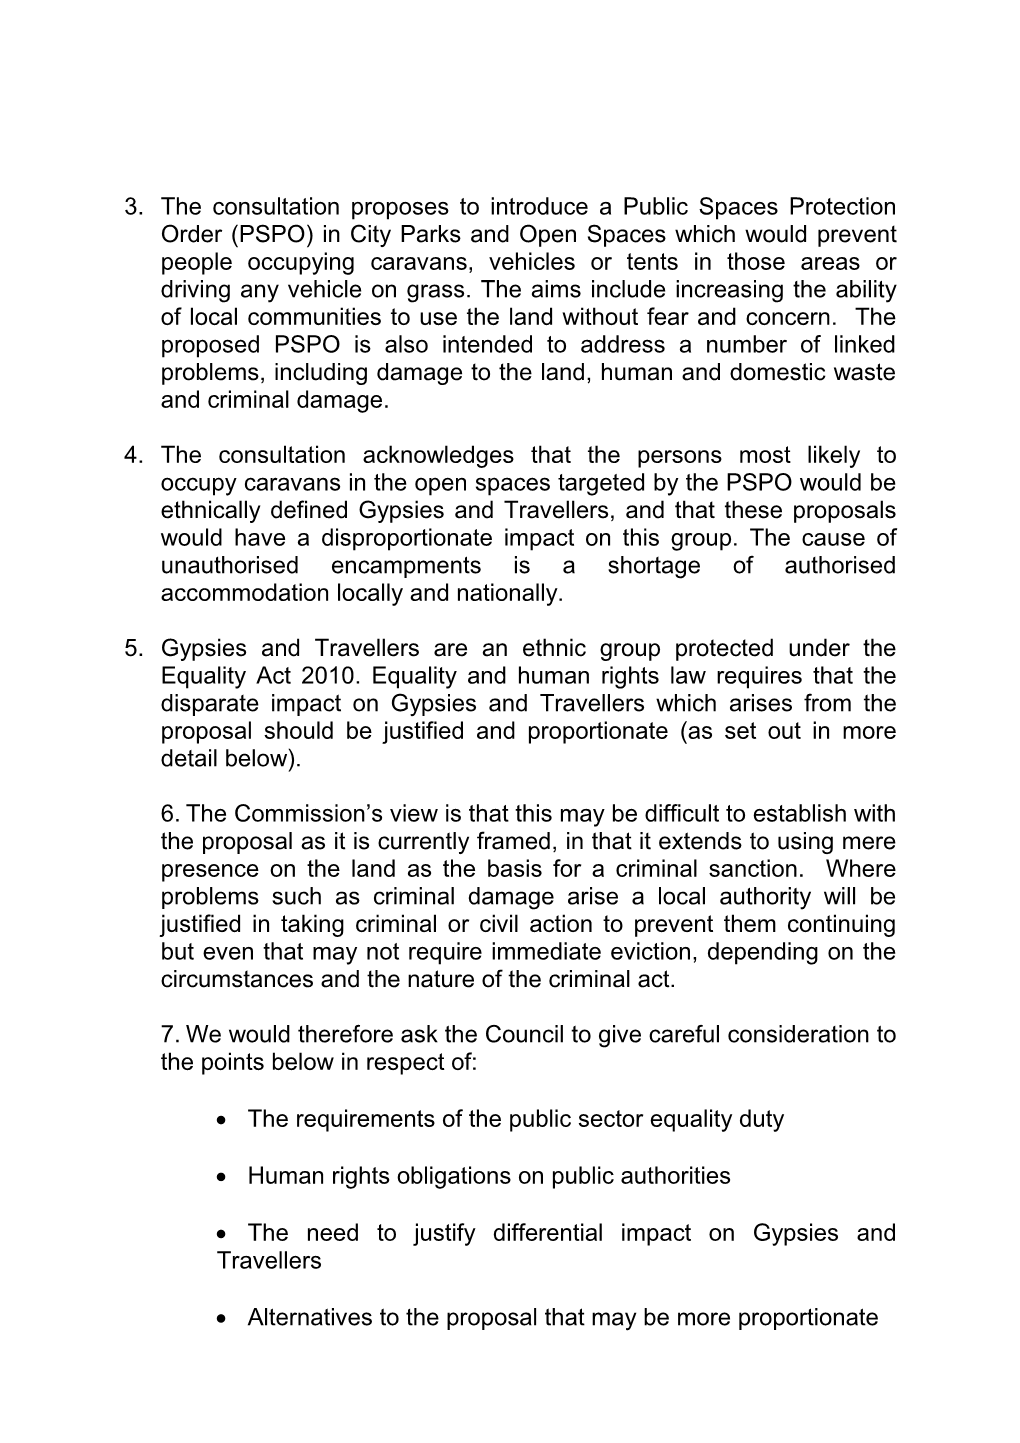 Response of the Equality and Human Rights Commission to the Consultation